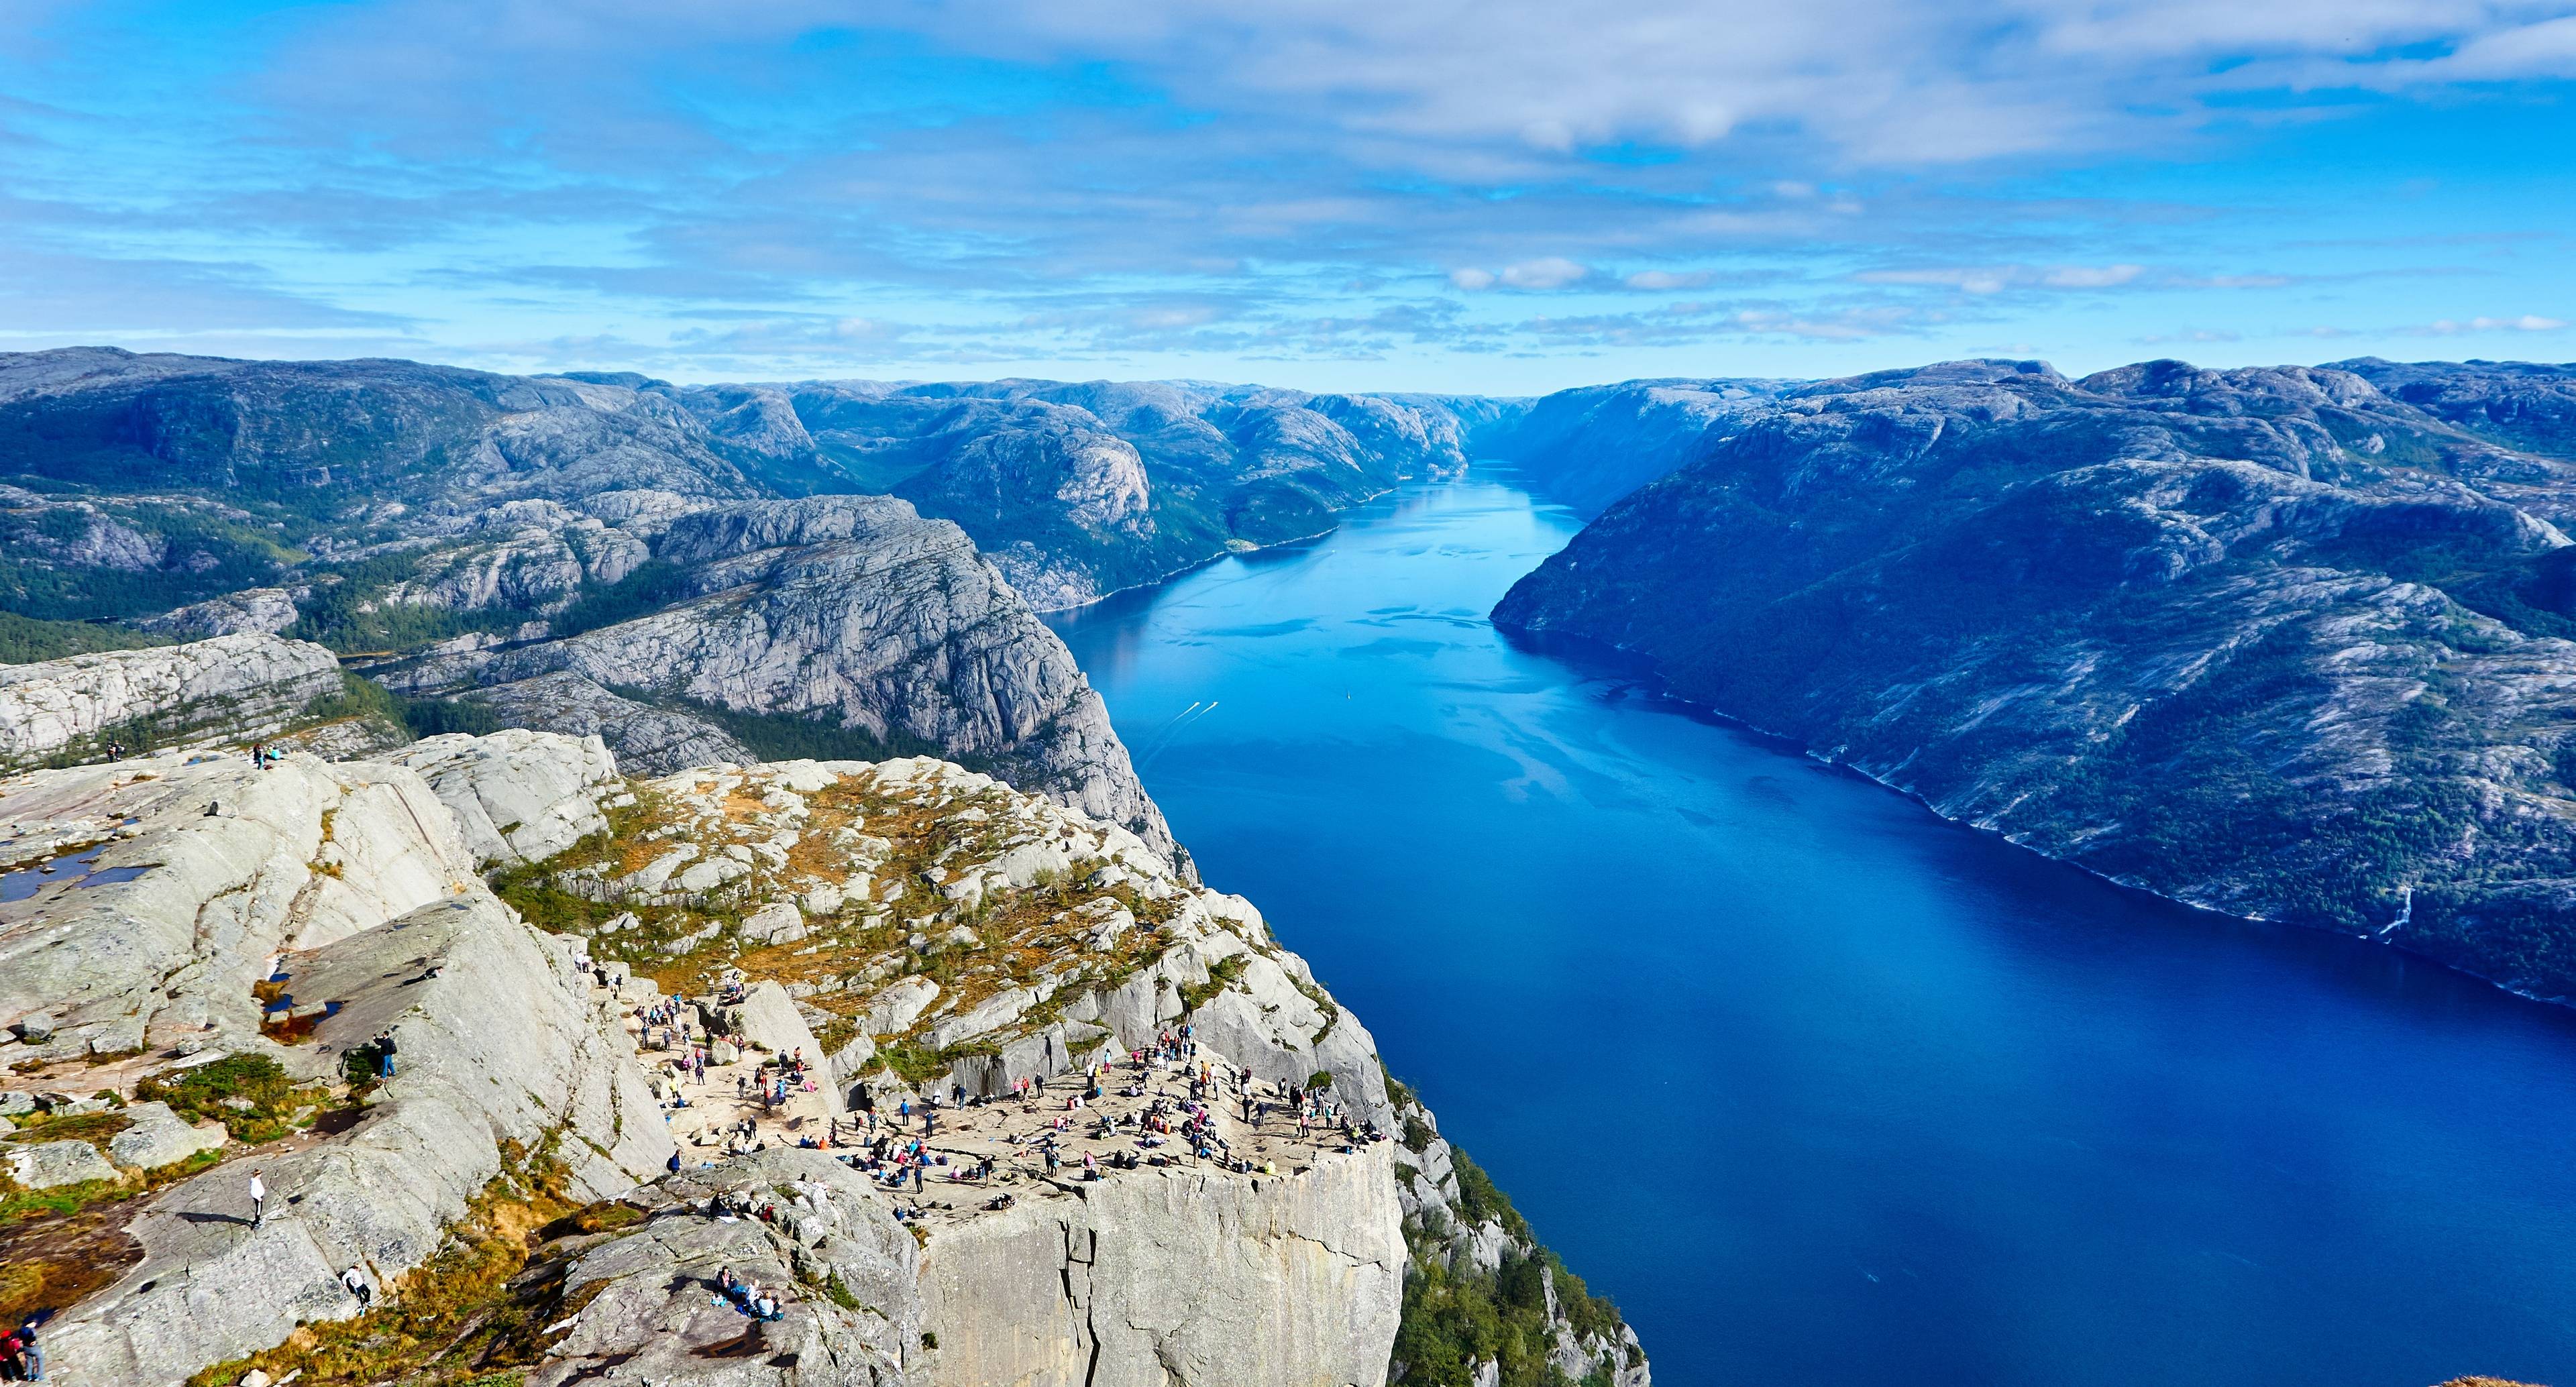 Visit Hardanger Fjord, The Fifth Longest Fjord in the World